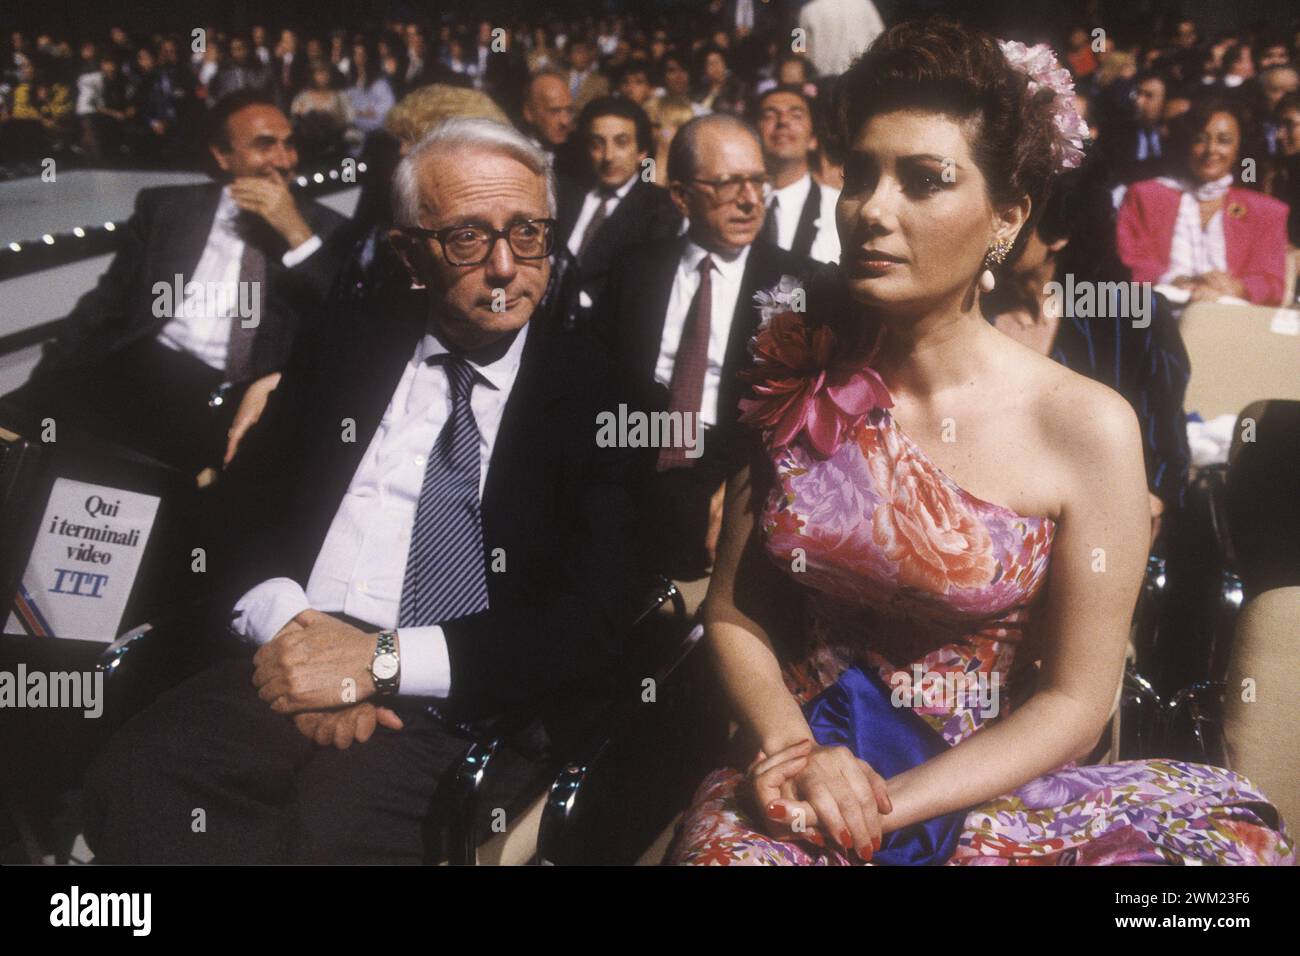 MME4770106 Italian journalist Enzo Biagi and French actress Edwige Fenech (about 1985)/Il giornalista Enzo Biagi e l'attrice Edwige Fenech (1985 circa) -; (add.info.: Italian journalist Enzo Biagi and French actress Edwige Fenech (about 1985)/Il giornalista Enzo Biagi e l'attrice Edwige Fenech (1985 circa) -); © Marcello Mencarini. All rights reserved 2024. Stock Photo